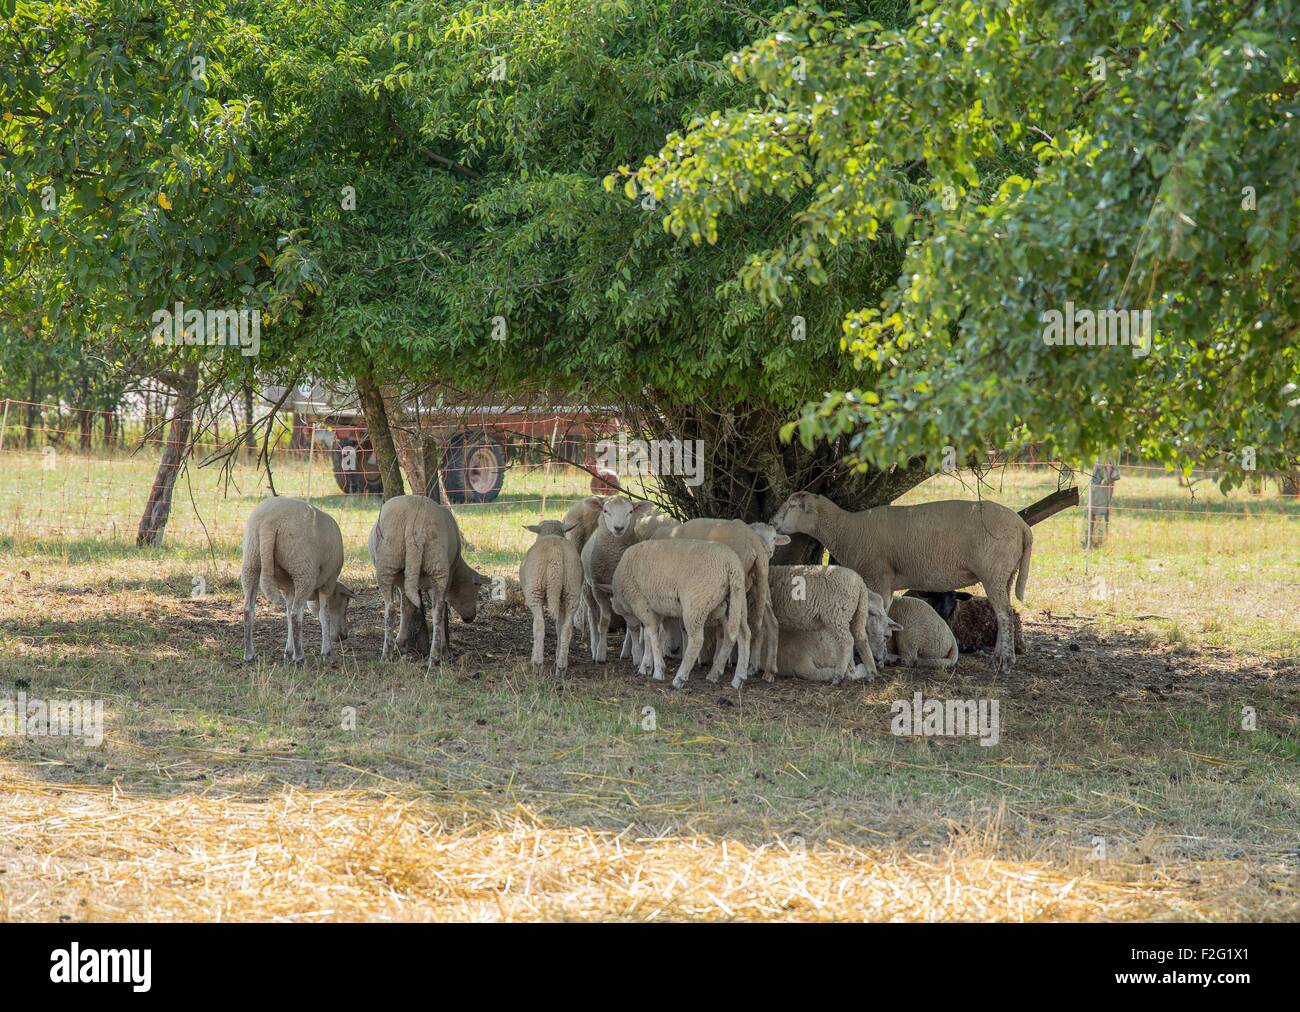 some sheep in the shade around a tree in rural ambiance Stock Photo